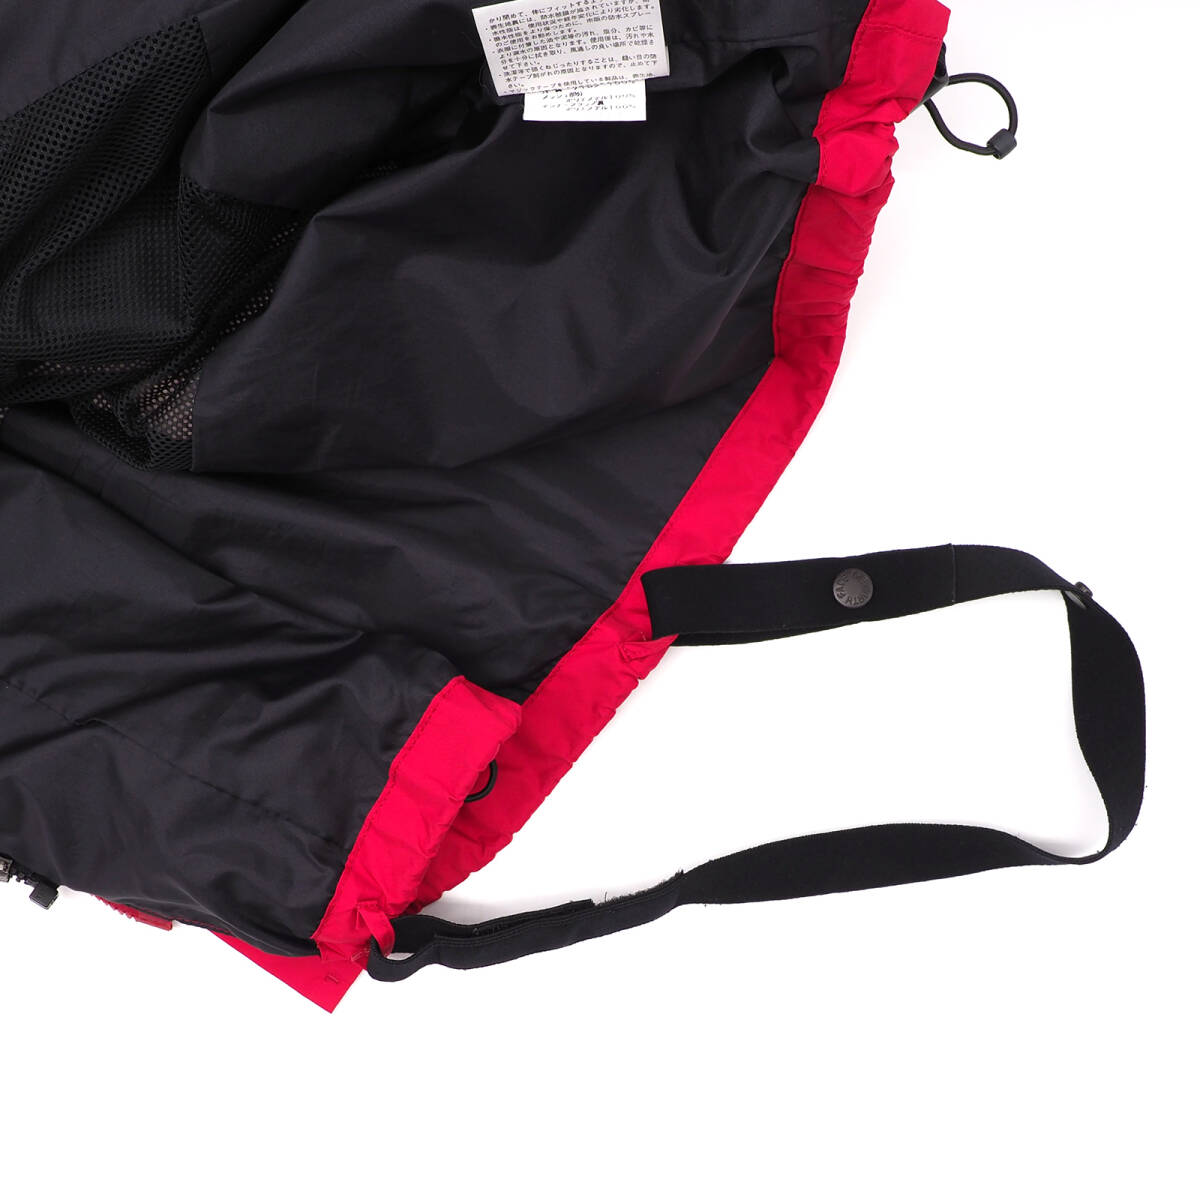 The North Face - Gore-Tex Moutain Parka (NP-2194 )　赤L　ザ ノース フェイス - ゴアテックスマウンテン パーカ_画像7